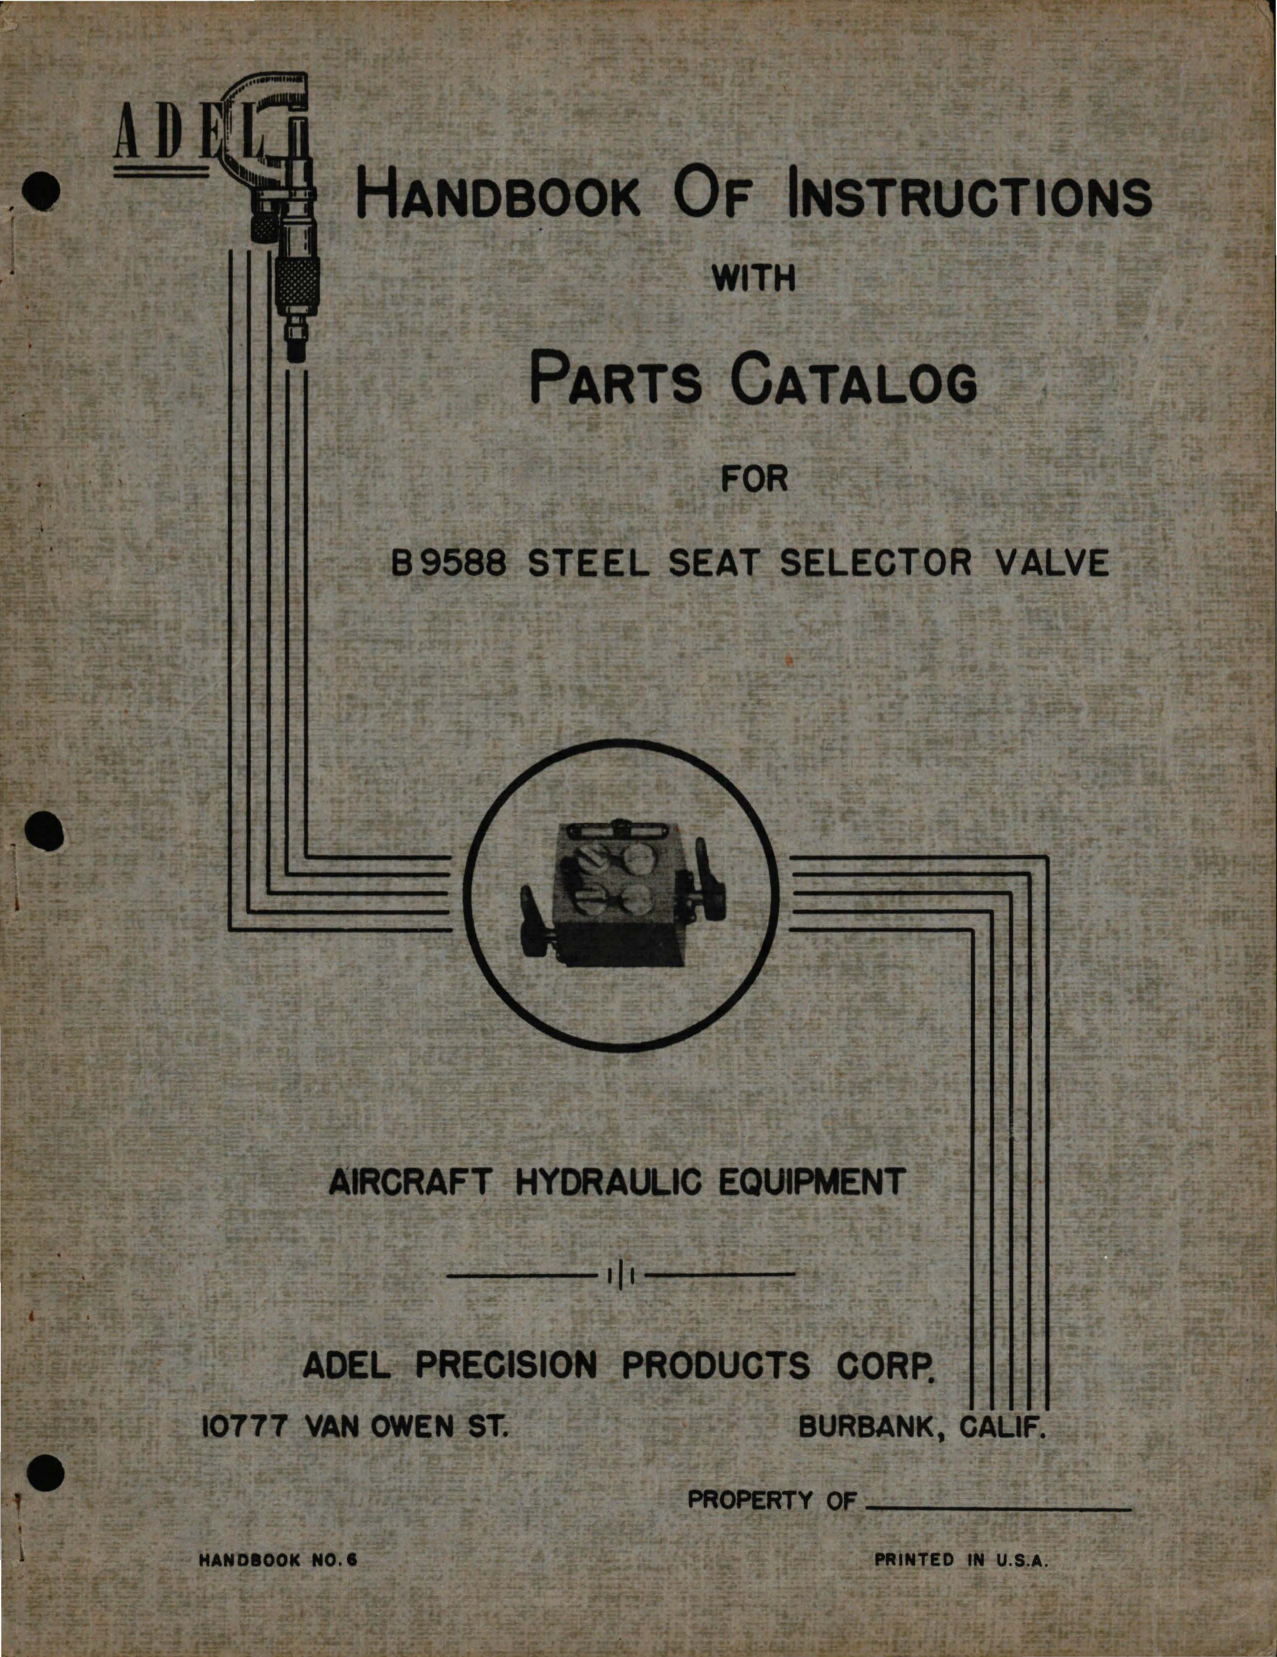 Sample page 1 from AirCorps Library document: Instructions with Parts Catalog for Steel Seat Selector Valve - B 9588 